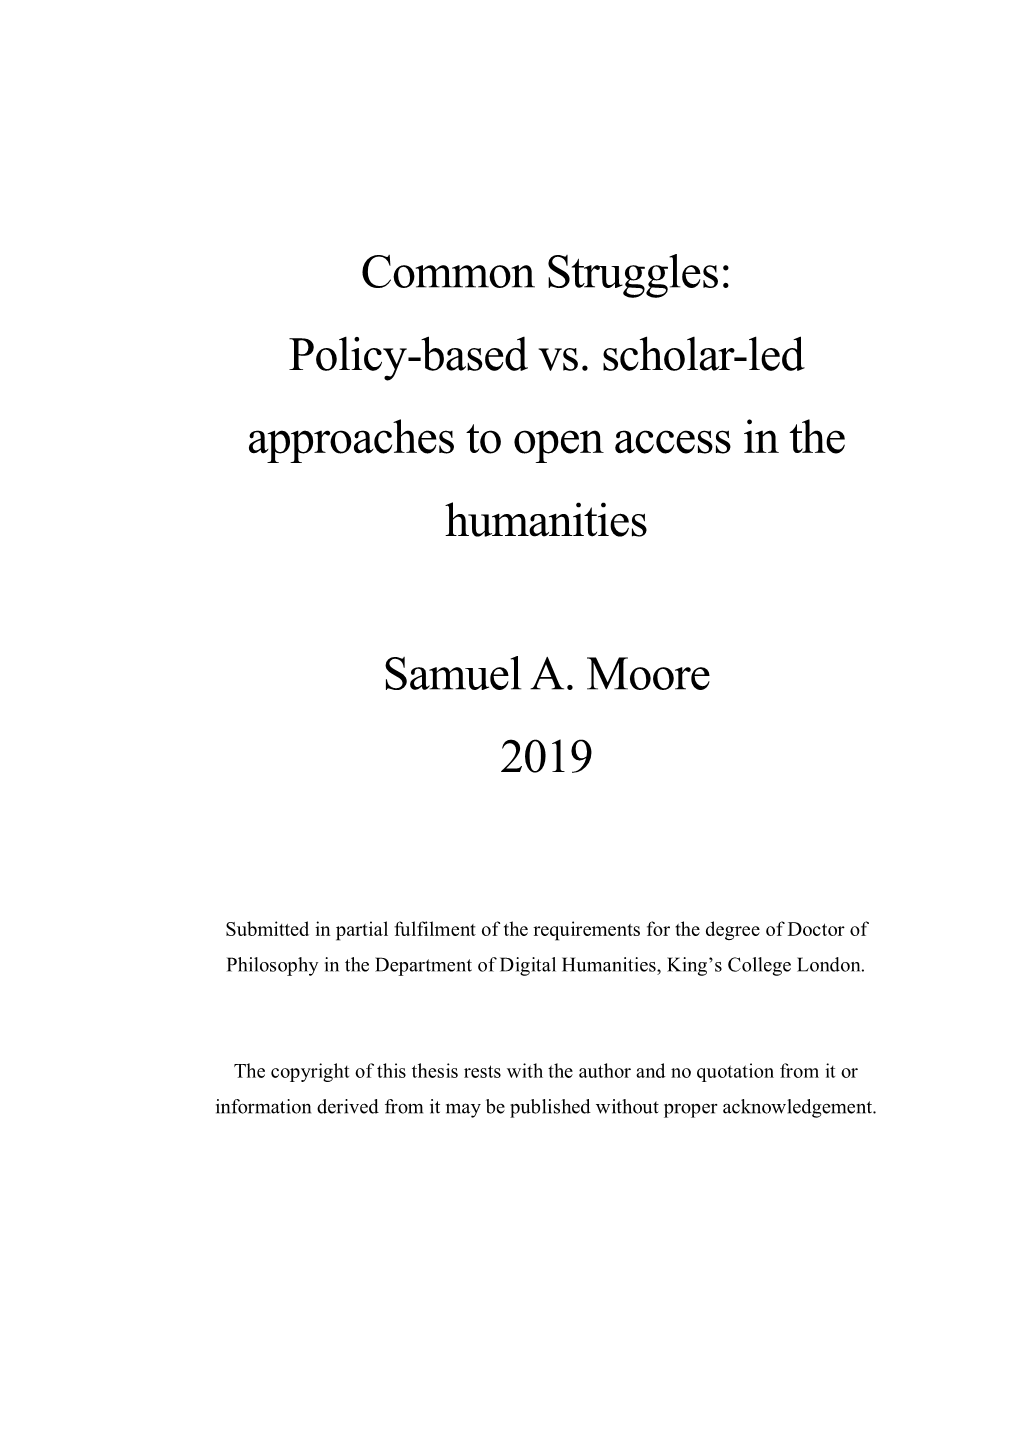 Common Struggles: Policy-Based Vs. Scholar-Led Approaches to Open Access in the Humanities